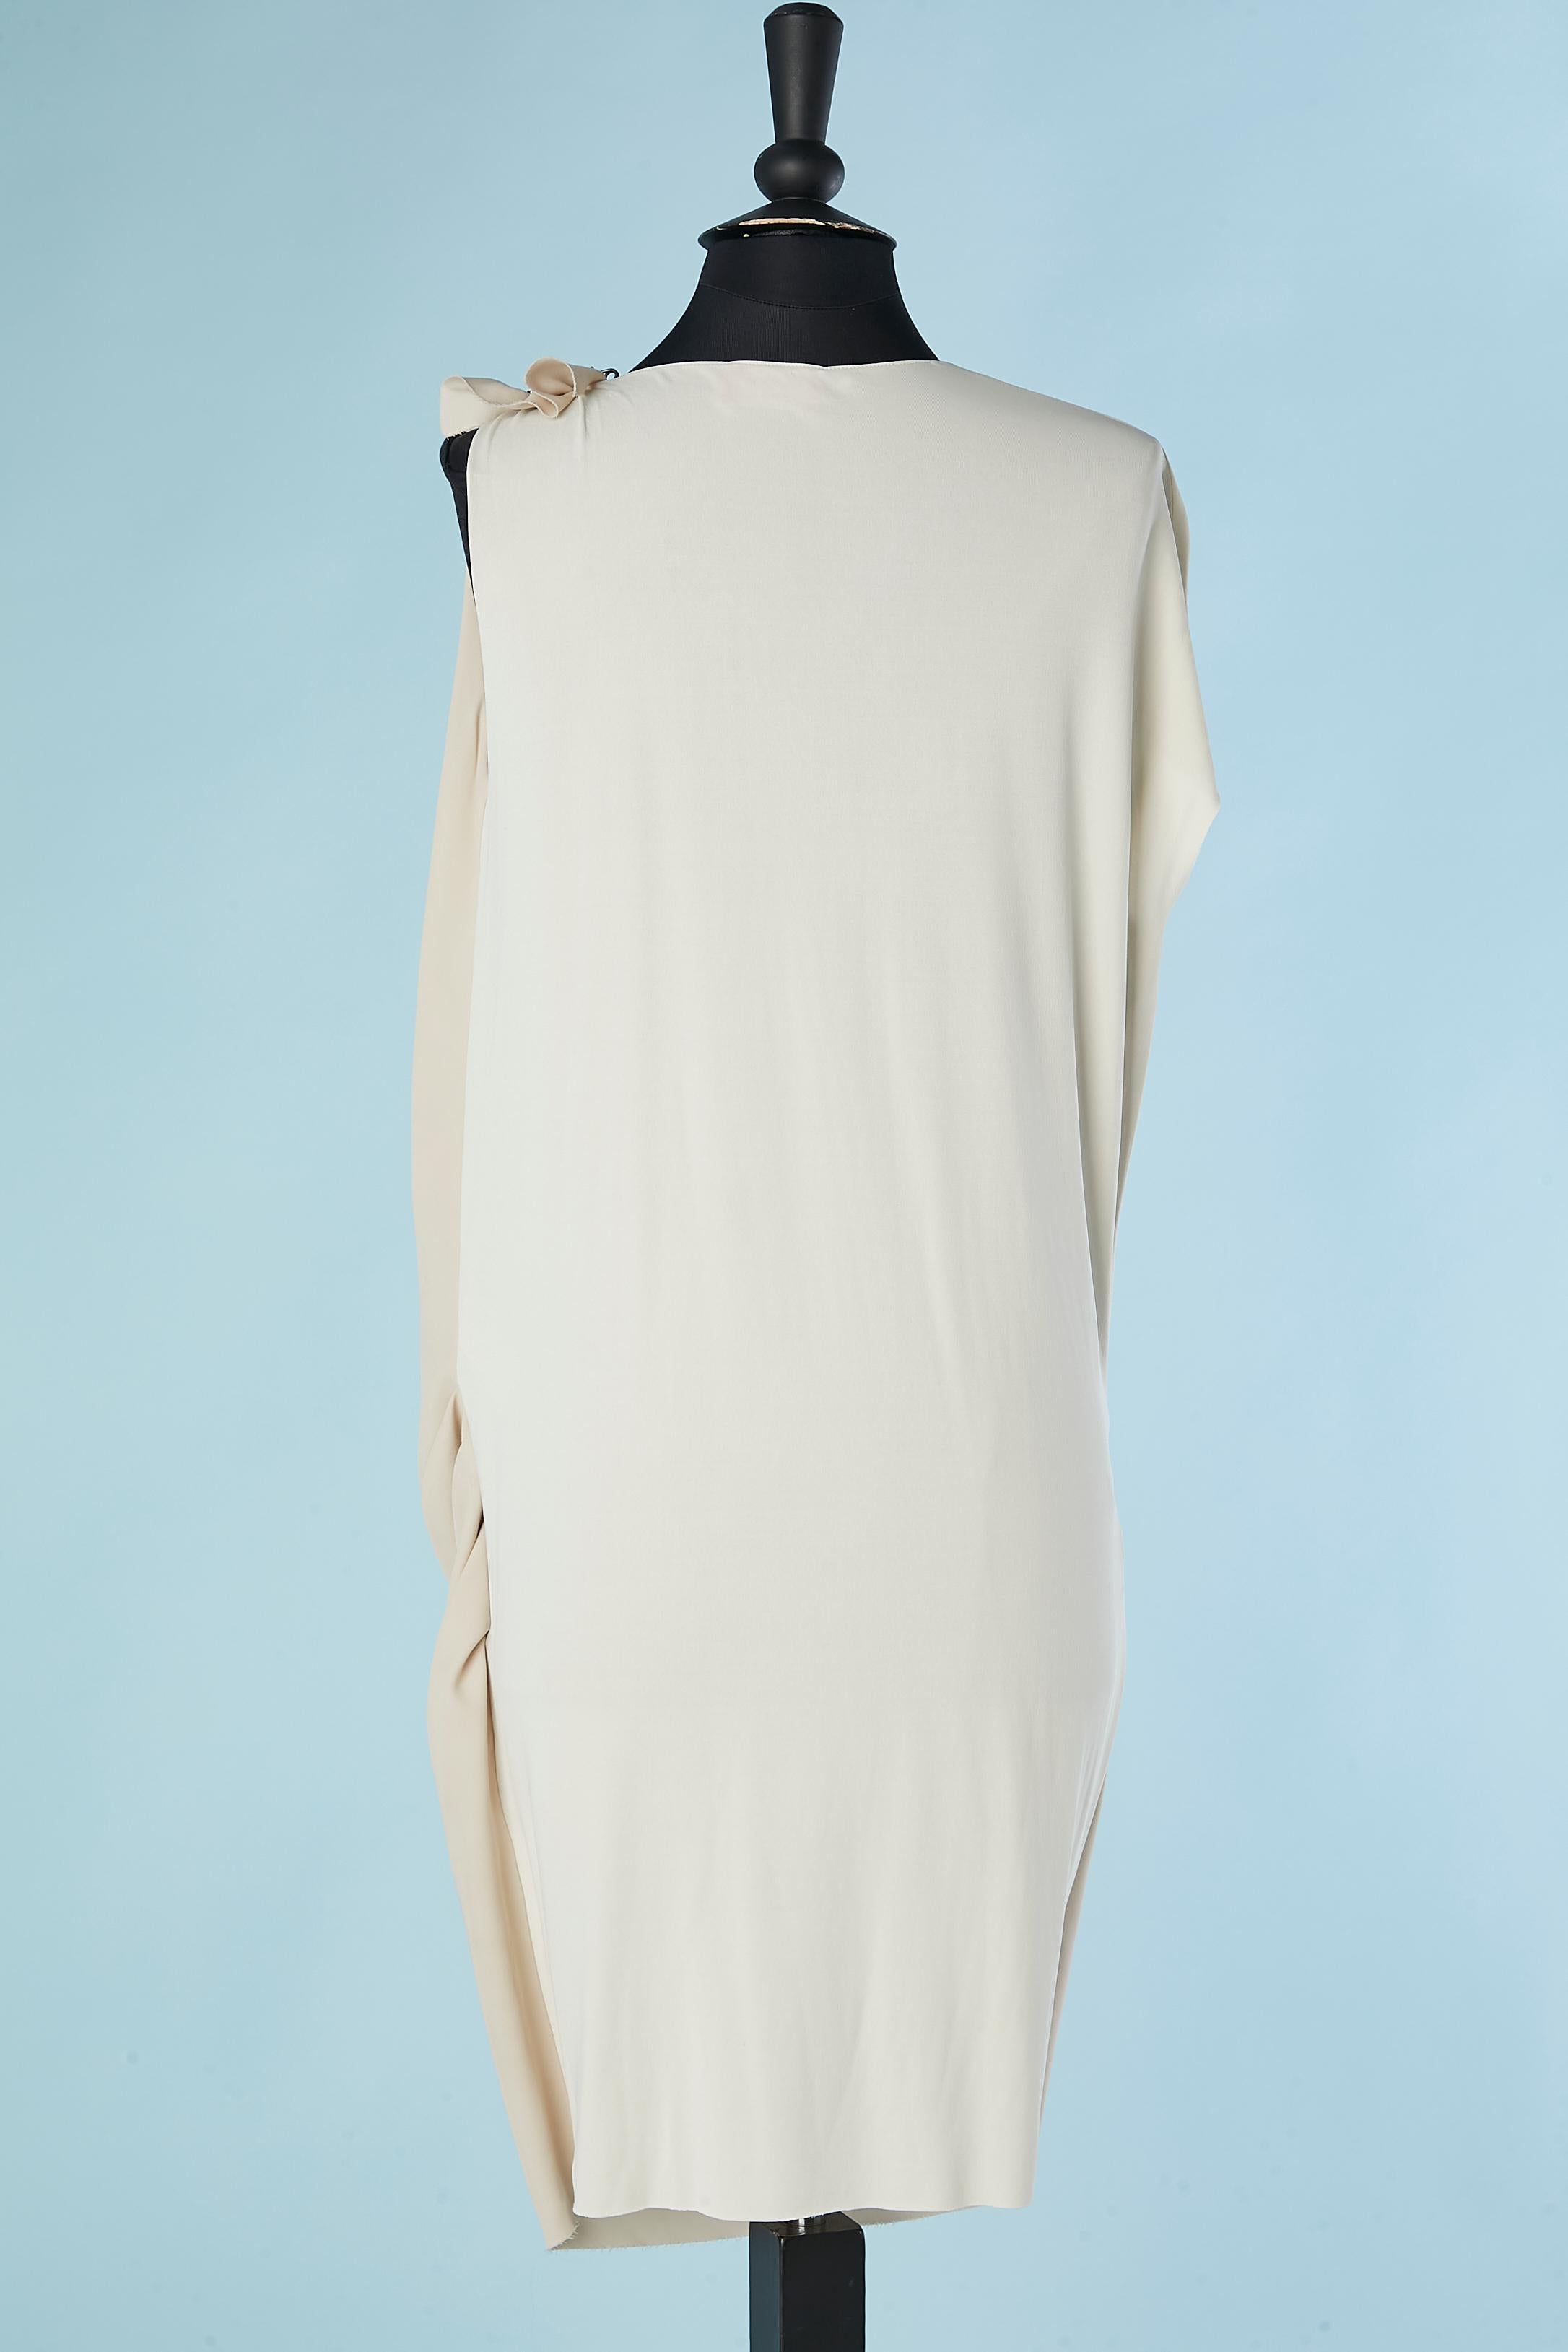 Beige and off-white jersey drape cocktail dress with jewelry safety pin Lanvin  For Sale 2